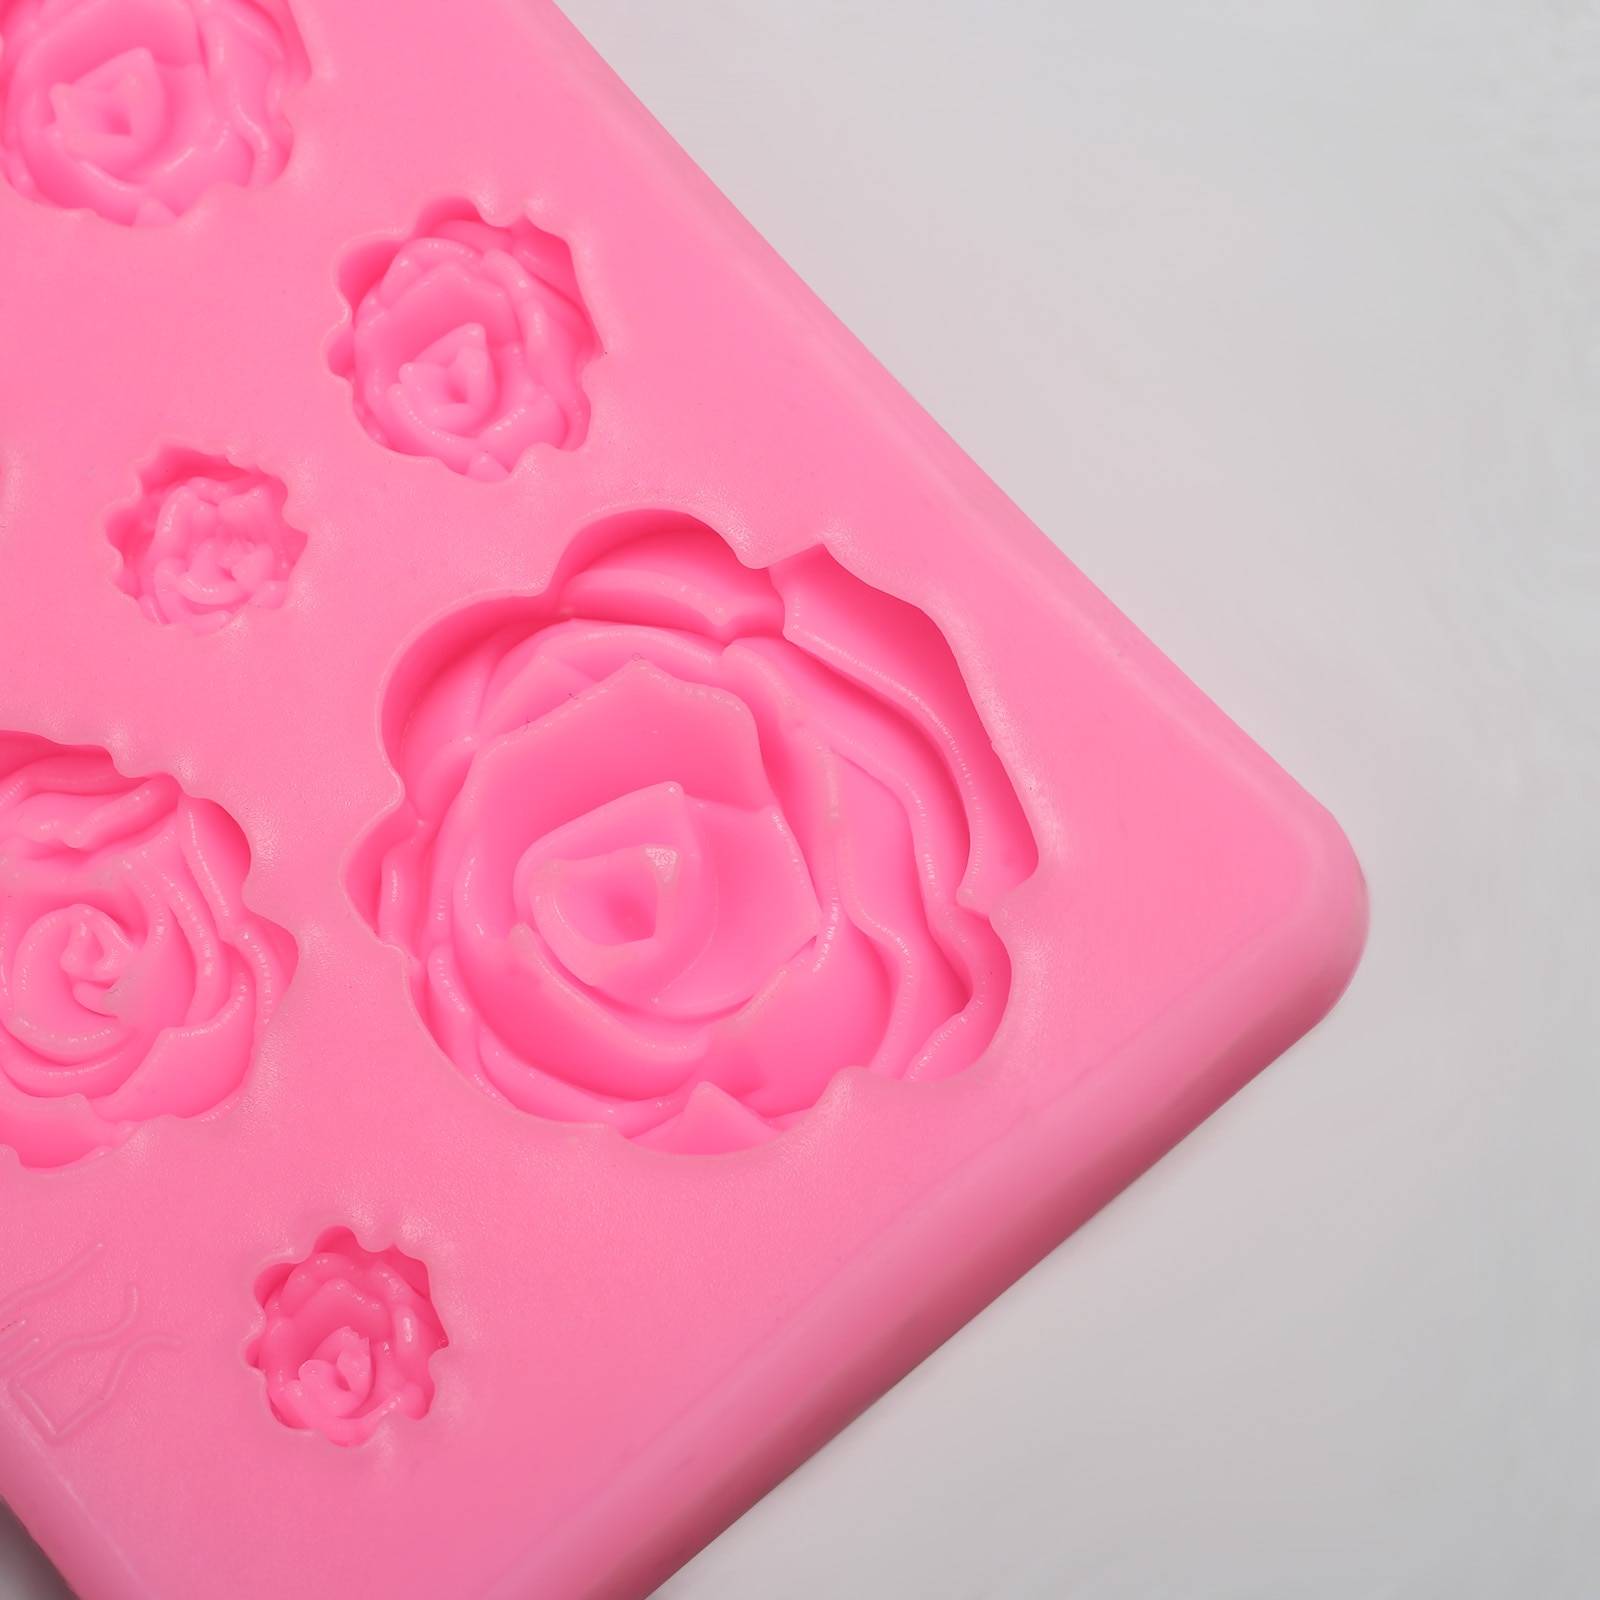 Rose Silicone Mold for Chocolate cb5feb1b7314637725a2e7: Gray|Pink